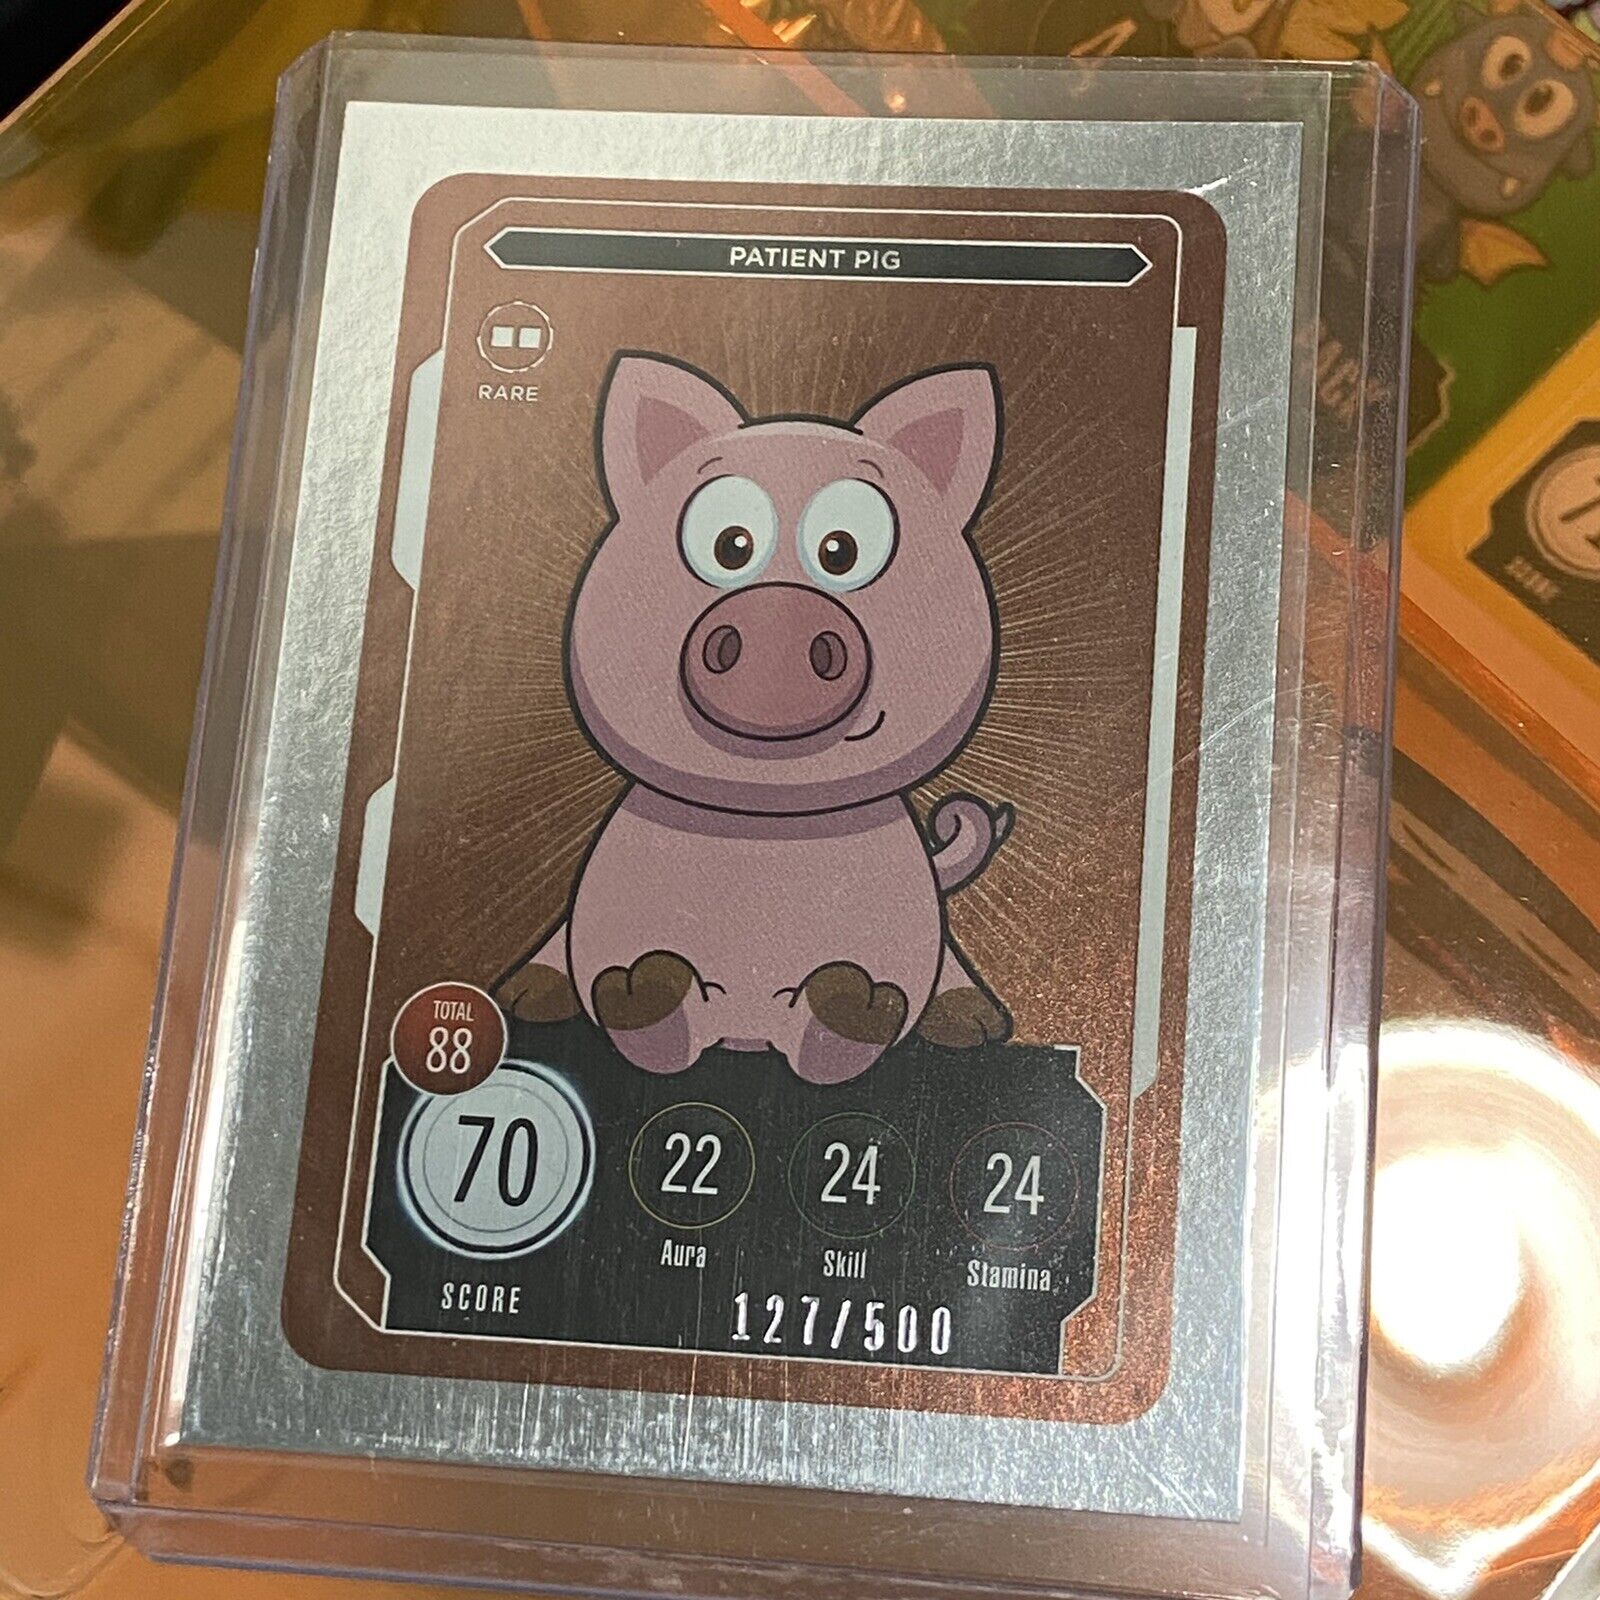 VeeFriends Series 2 Compete & Collect Trading Cards Patient Pig 127/500 RARE